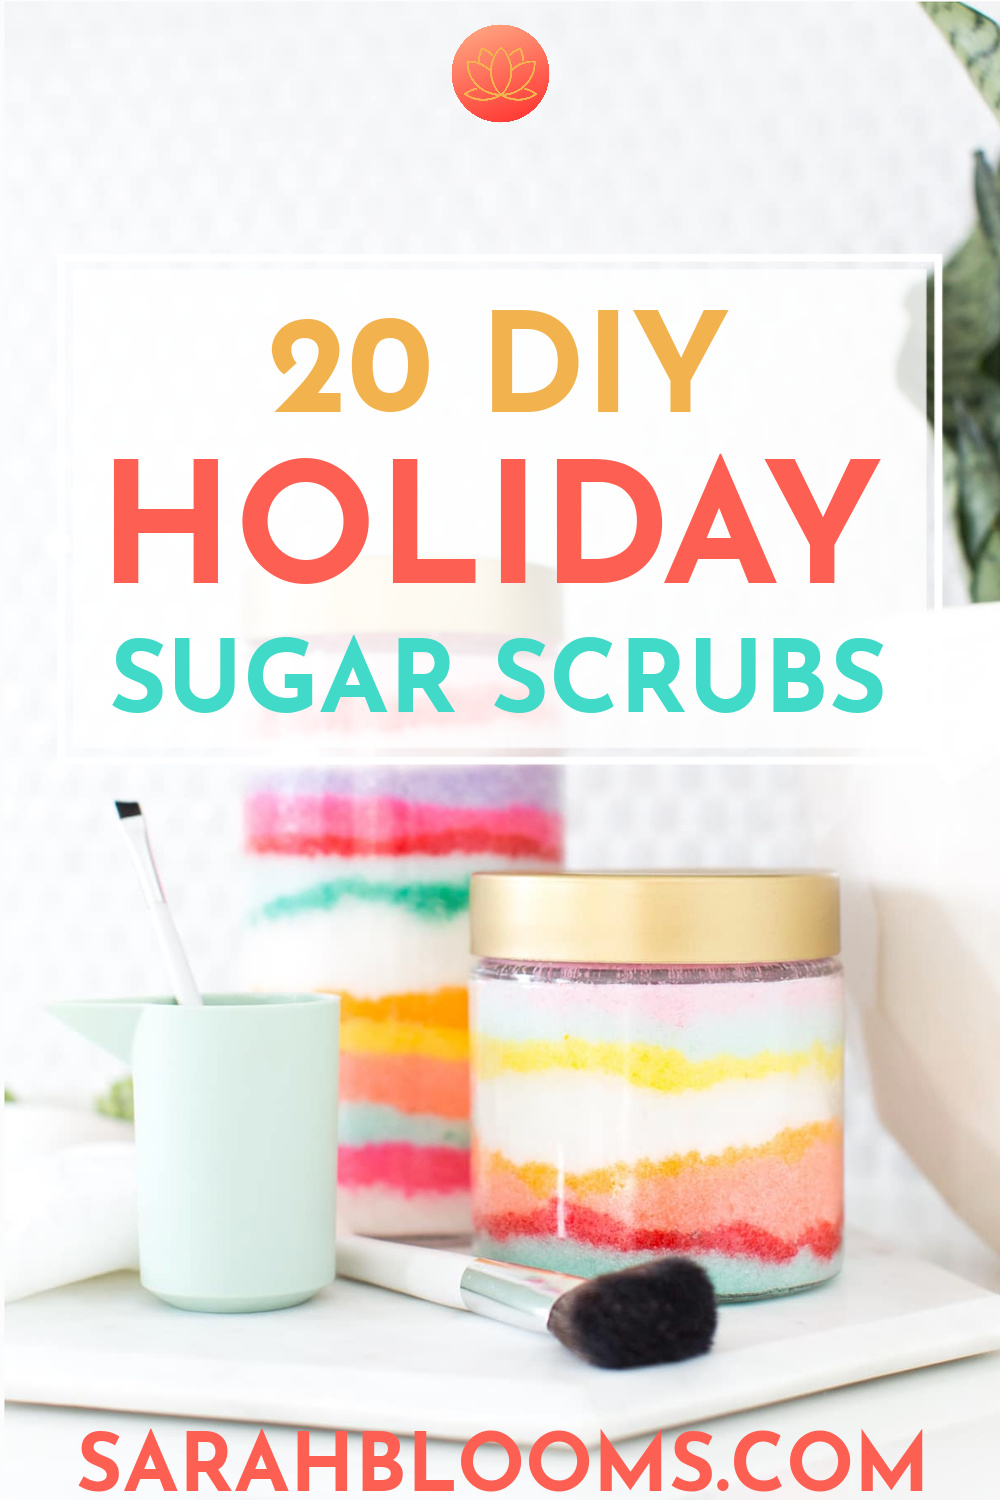 Pamper everyone on your Christmas list with these Frugal, All-Natural DIY Holiday Sugar Scrubs they will love! The holidays are stressful! Give the gift of relaxation with these 20 Best DIY Holiday Sugar Scrubs for gifts they will love on a dime! #holidaysugarscrubs #diysugarscrubs #sugarscrubrecipes #diychristmas #diyholiday #diygifts #diychristmasgifts #frugalgifts #cheapgifts